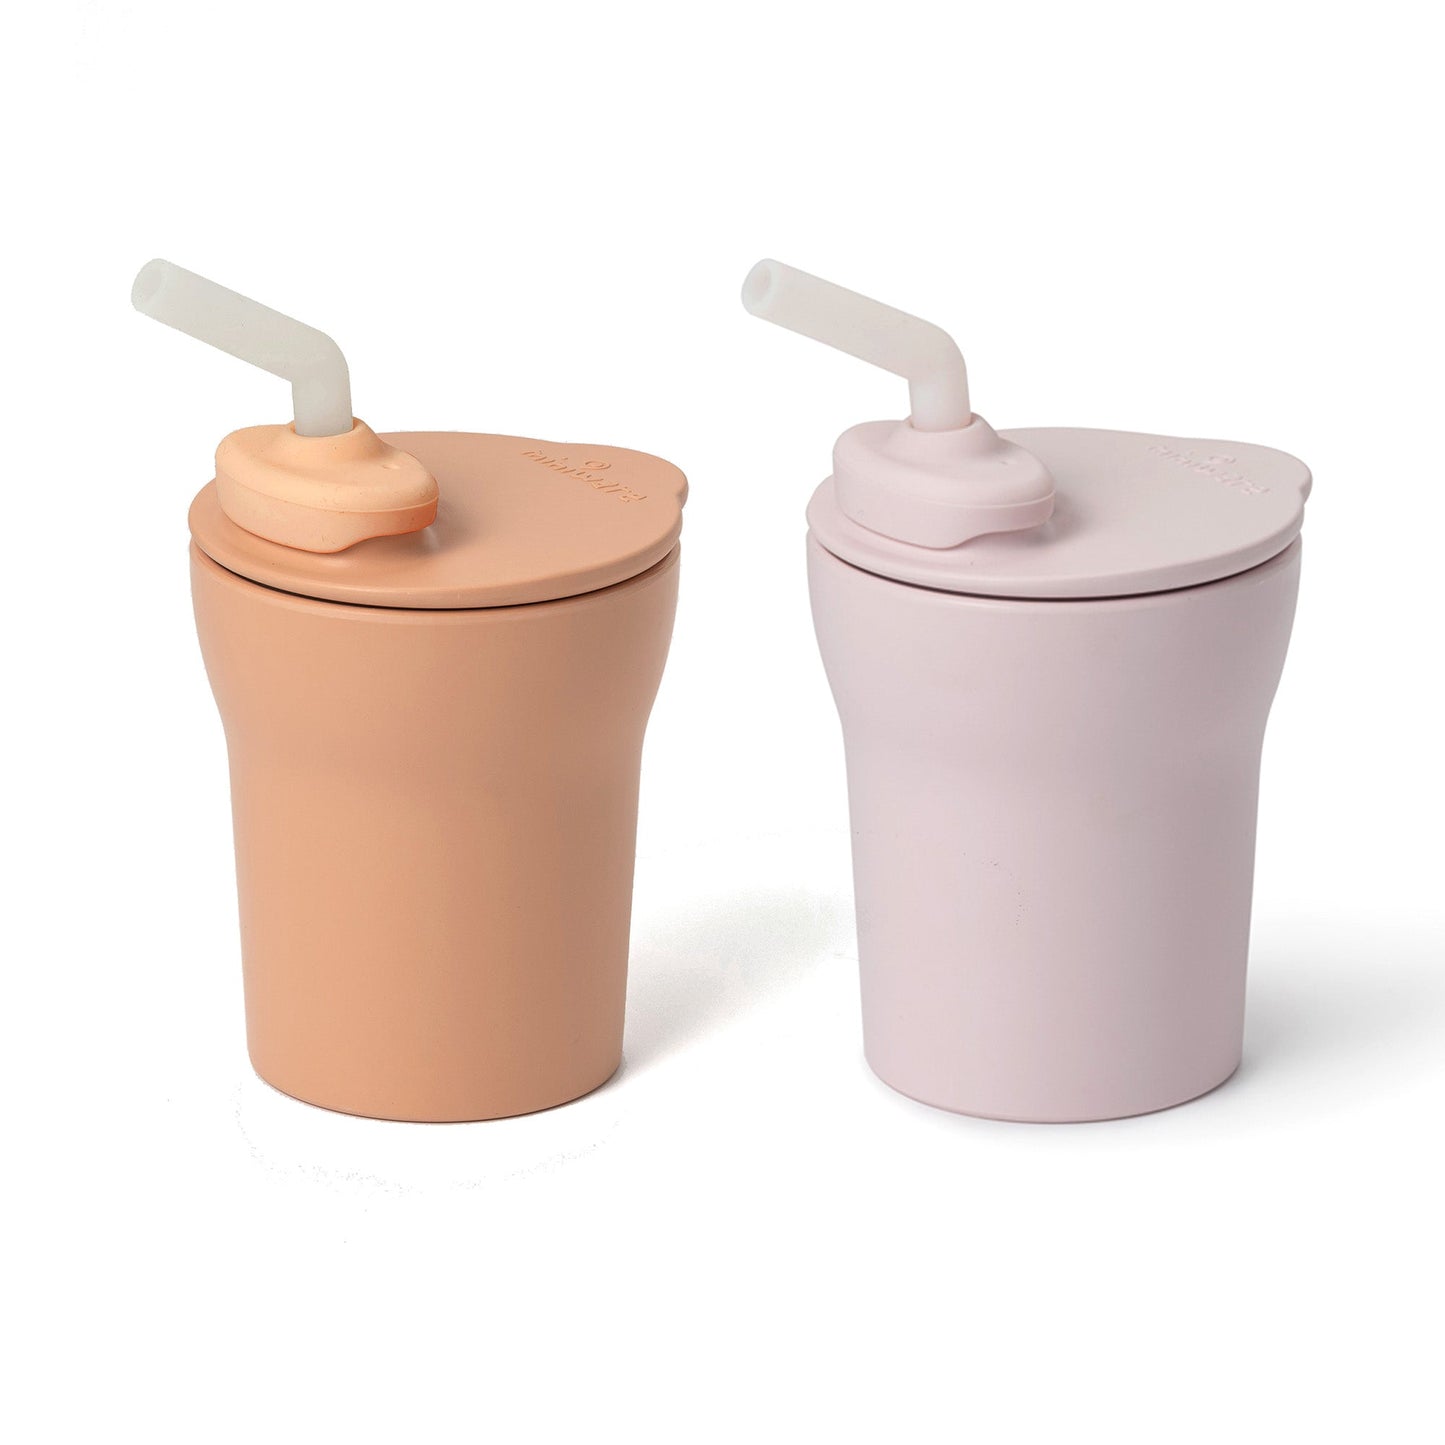 1-2-3 Sip! Cup - Pack of 2 (Toffee & Cotton Candy)